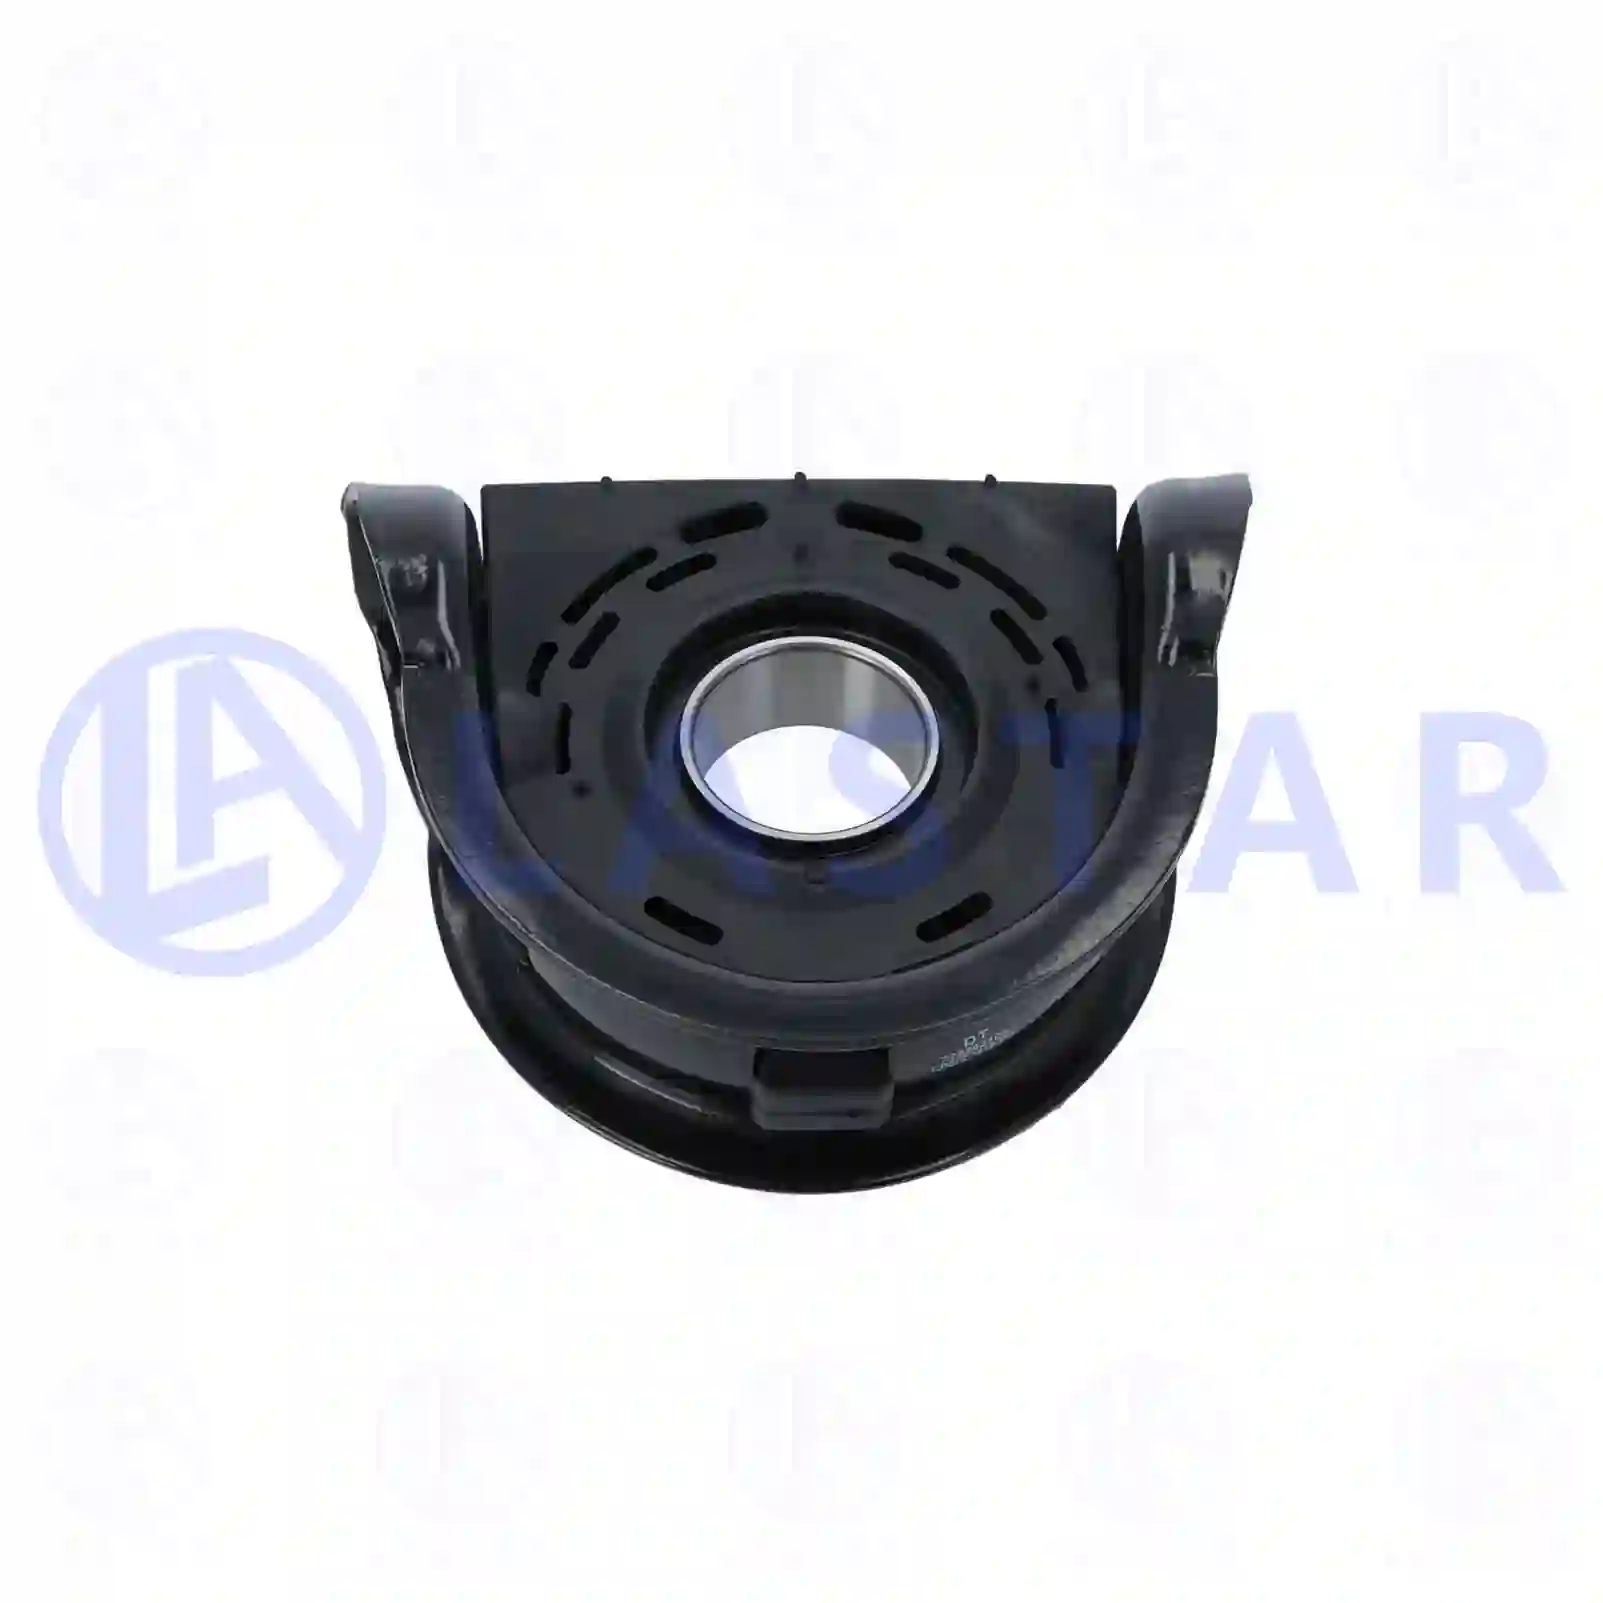 Support Bearing Center bearing, la no: 77734330 ,  oem no:7421026452, 21026452, ZG02499-0008 Lastar Spare Part | Truck Spare Parts, Auotomotive Spare Parts